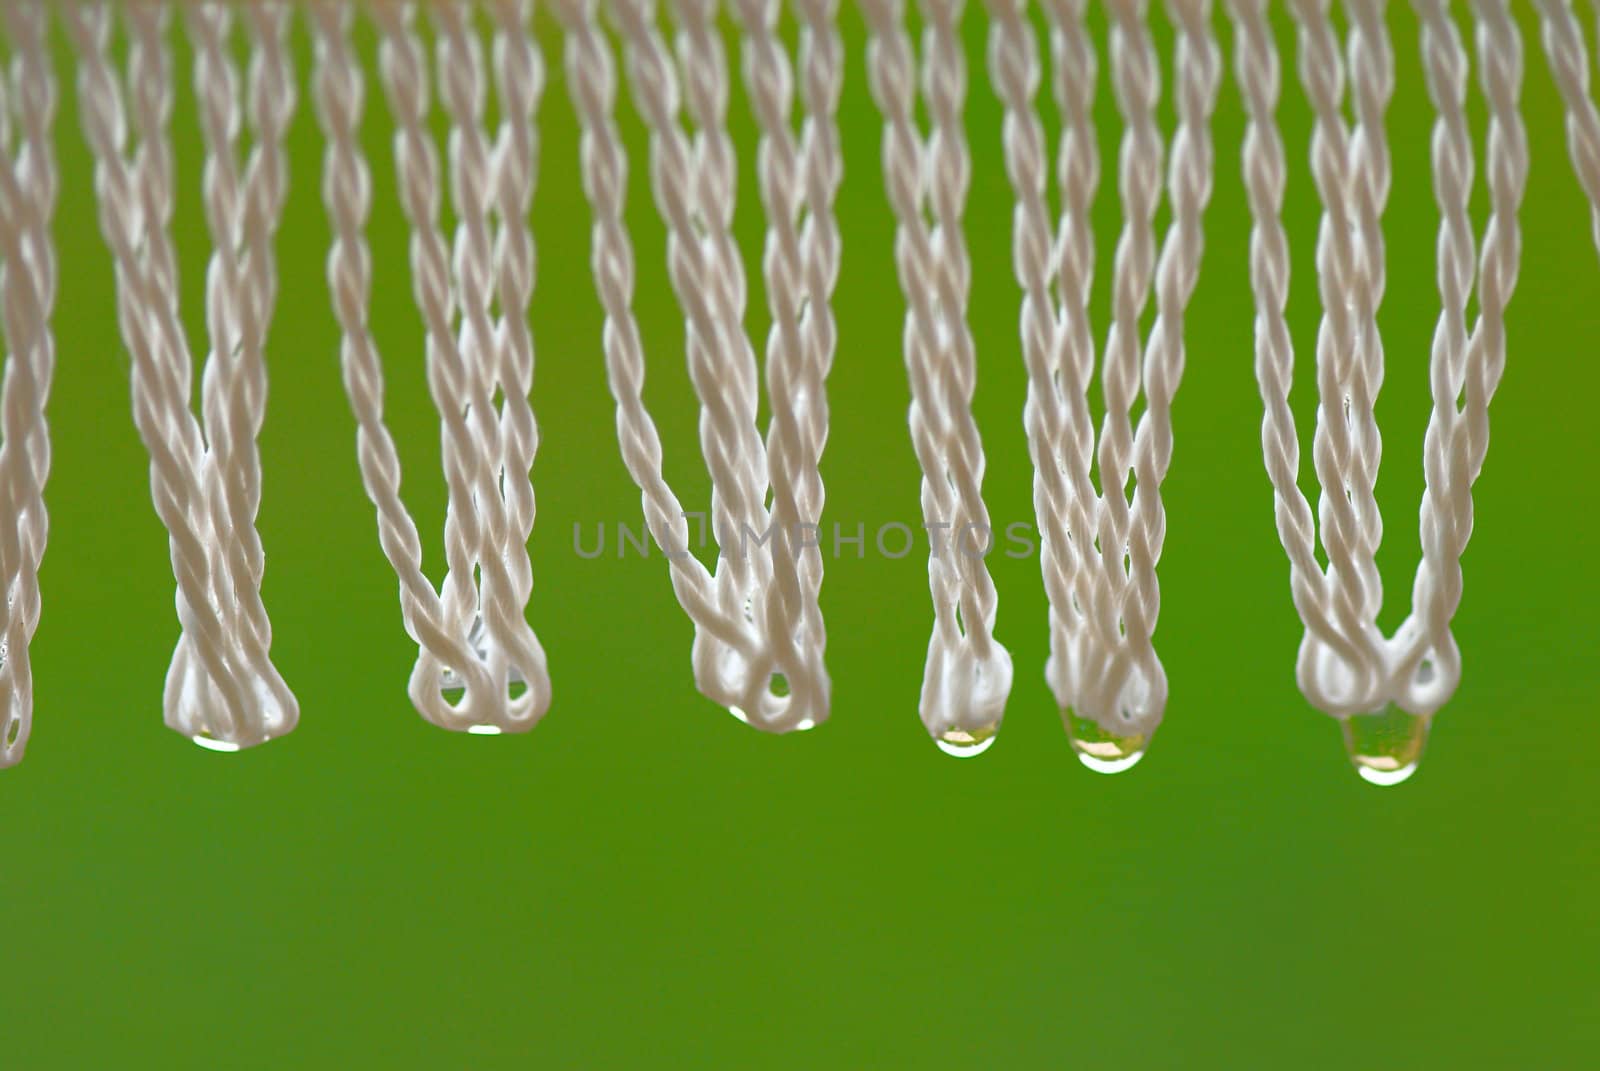 Drops of water on a fringe of a umbrella